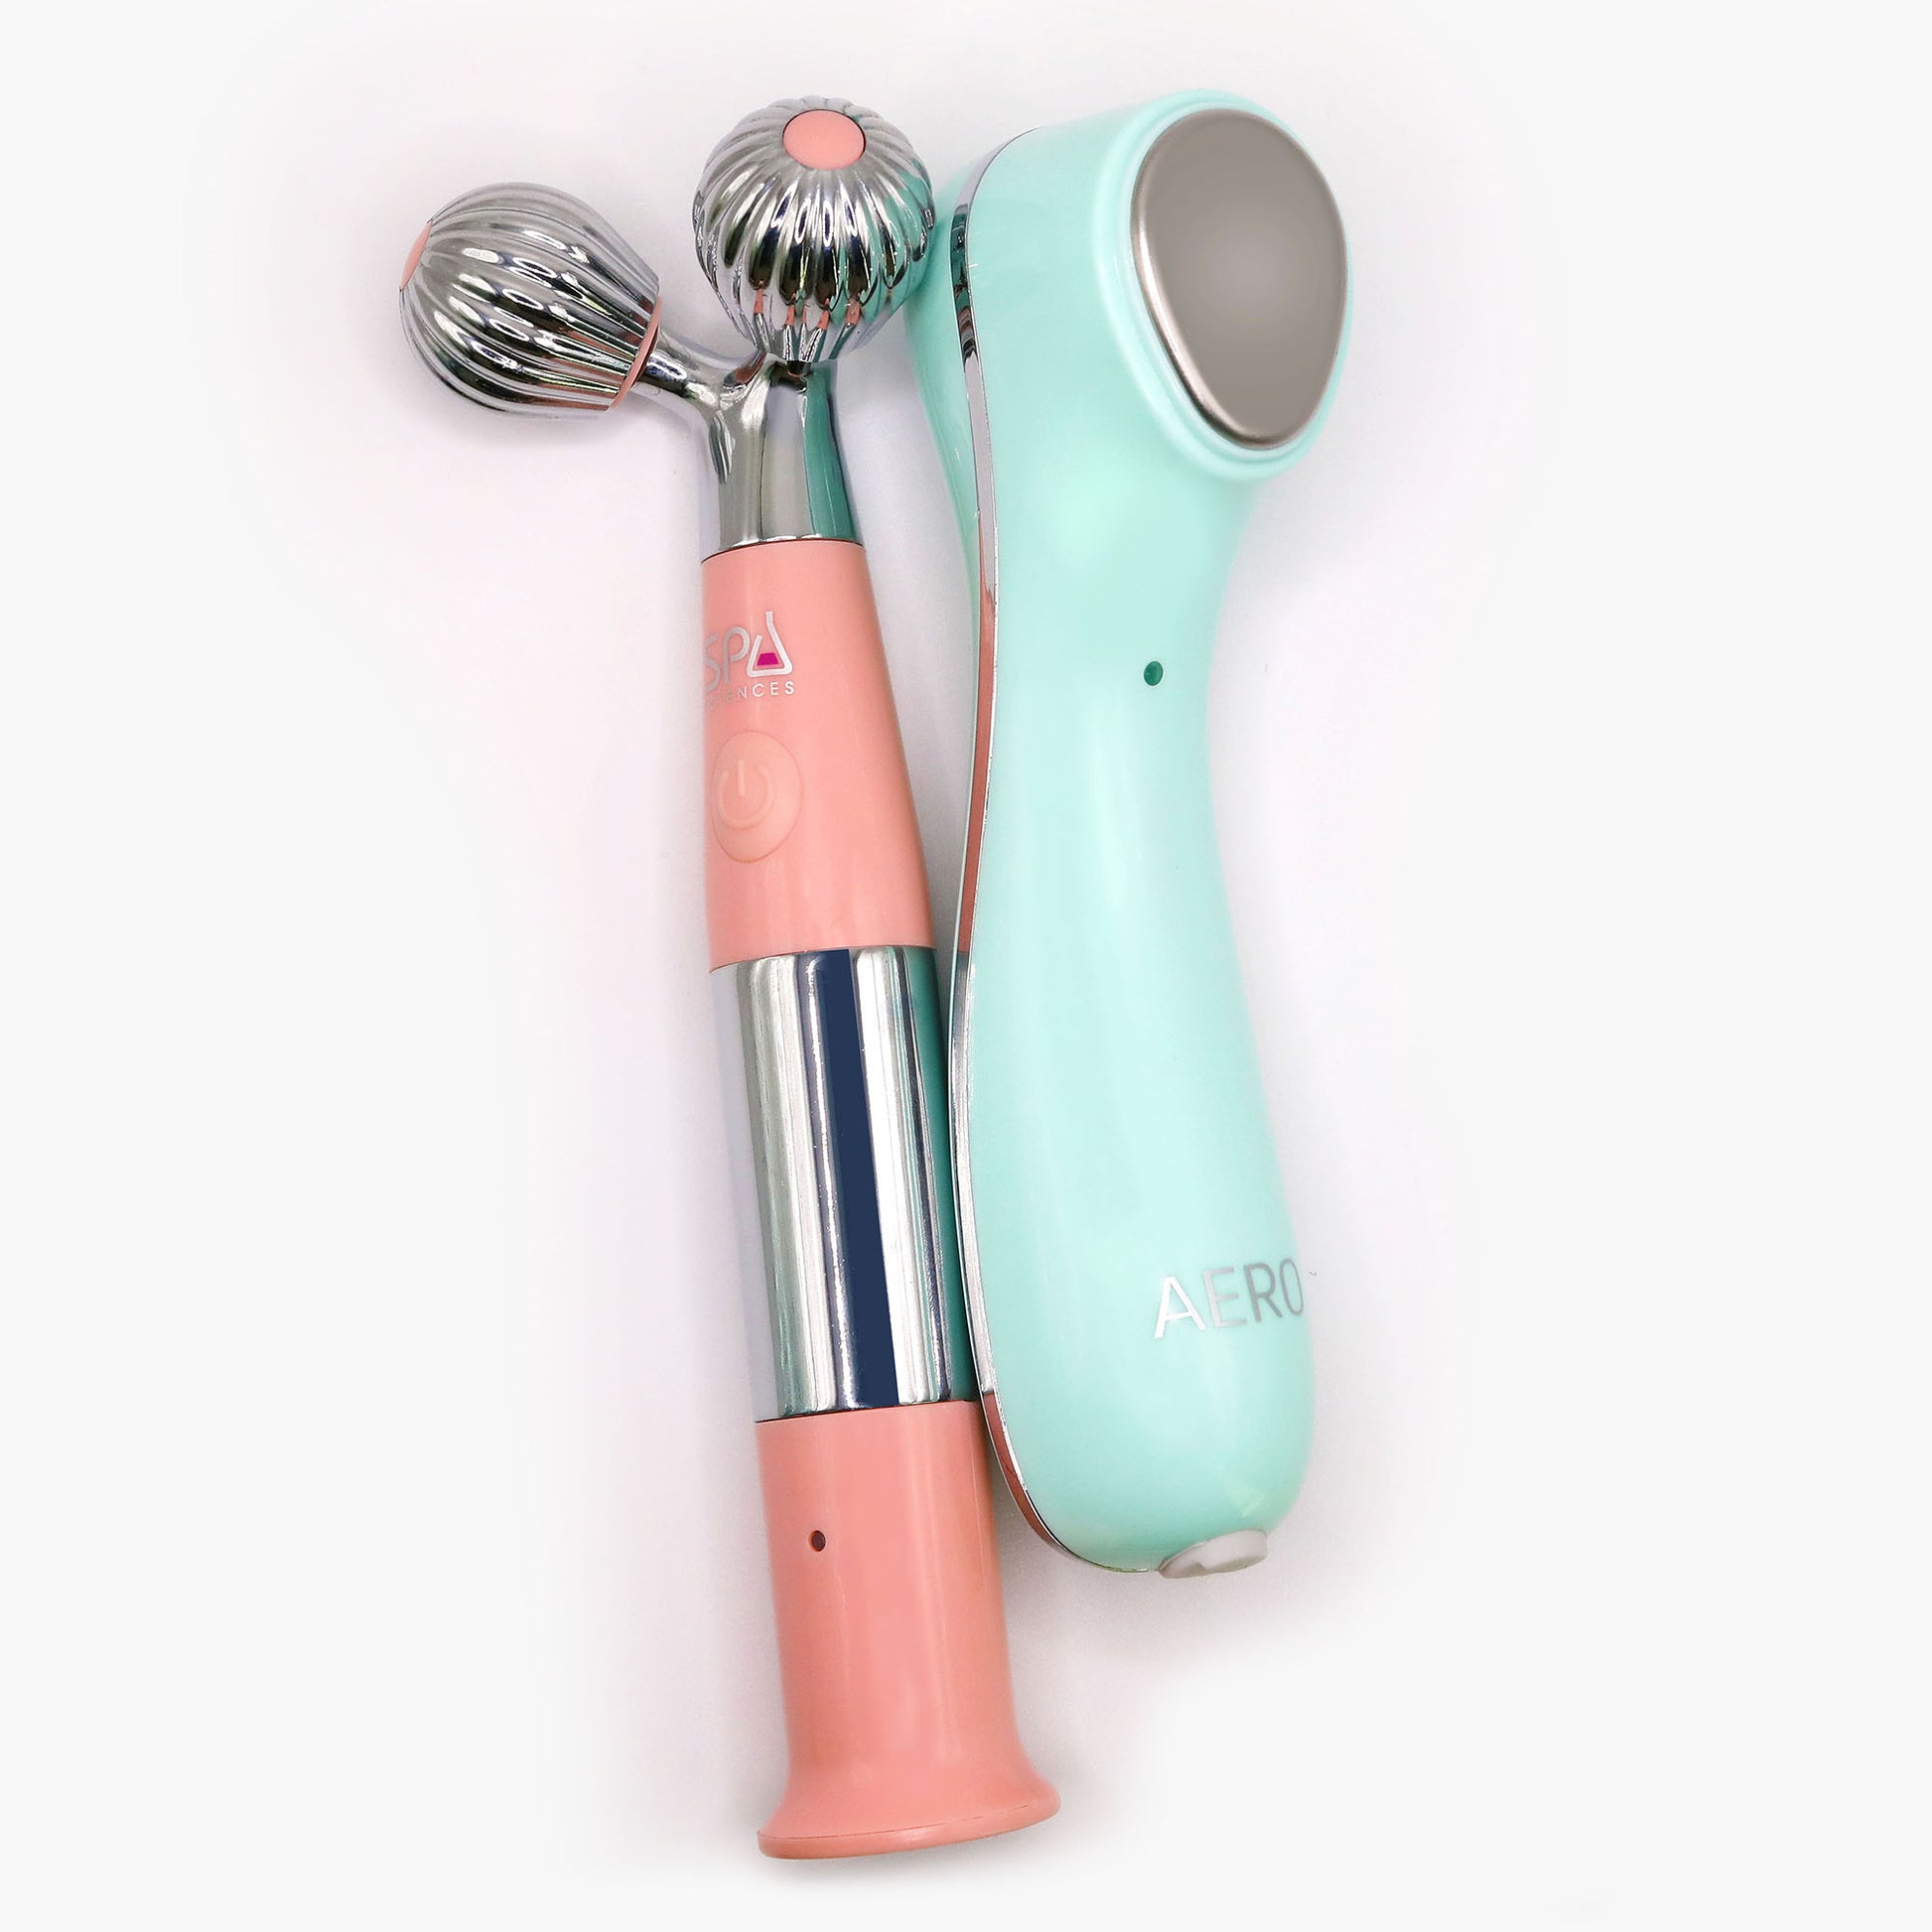 A pink and blue Ultimate Moisture Bundle electric toothbrush and a pink and blue Ultimate Moisture Bundle electric toothbrush by Spa Sciences.